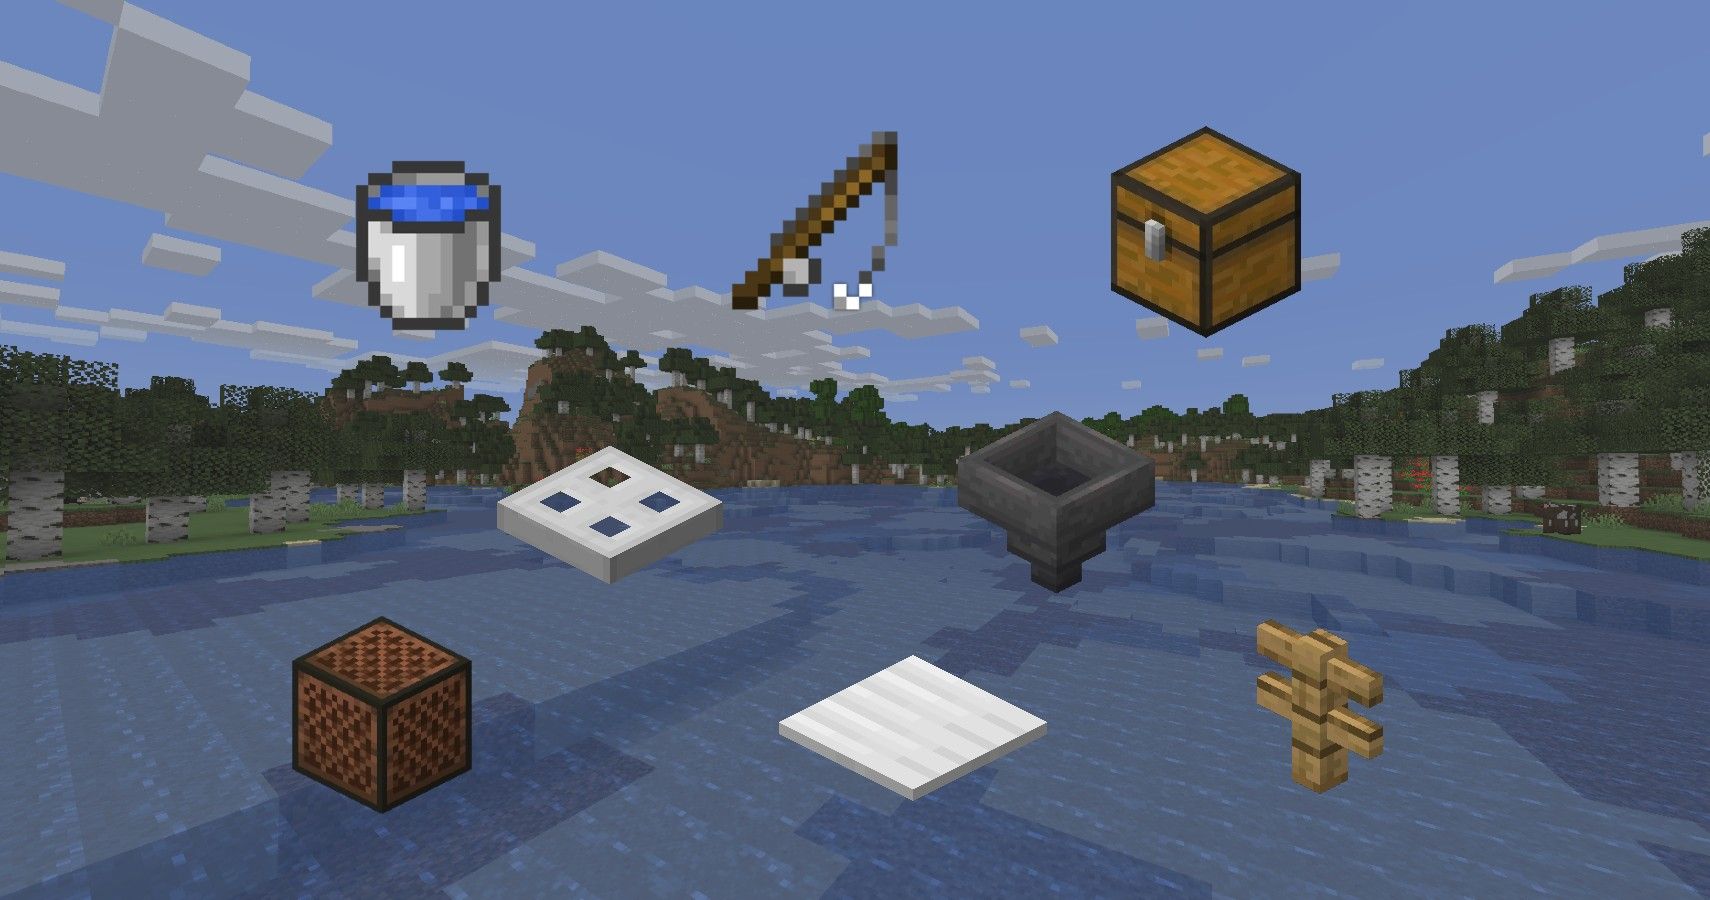 Materials to make an AFK fishing farm in Minecraft